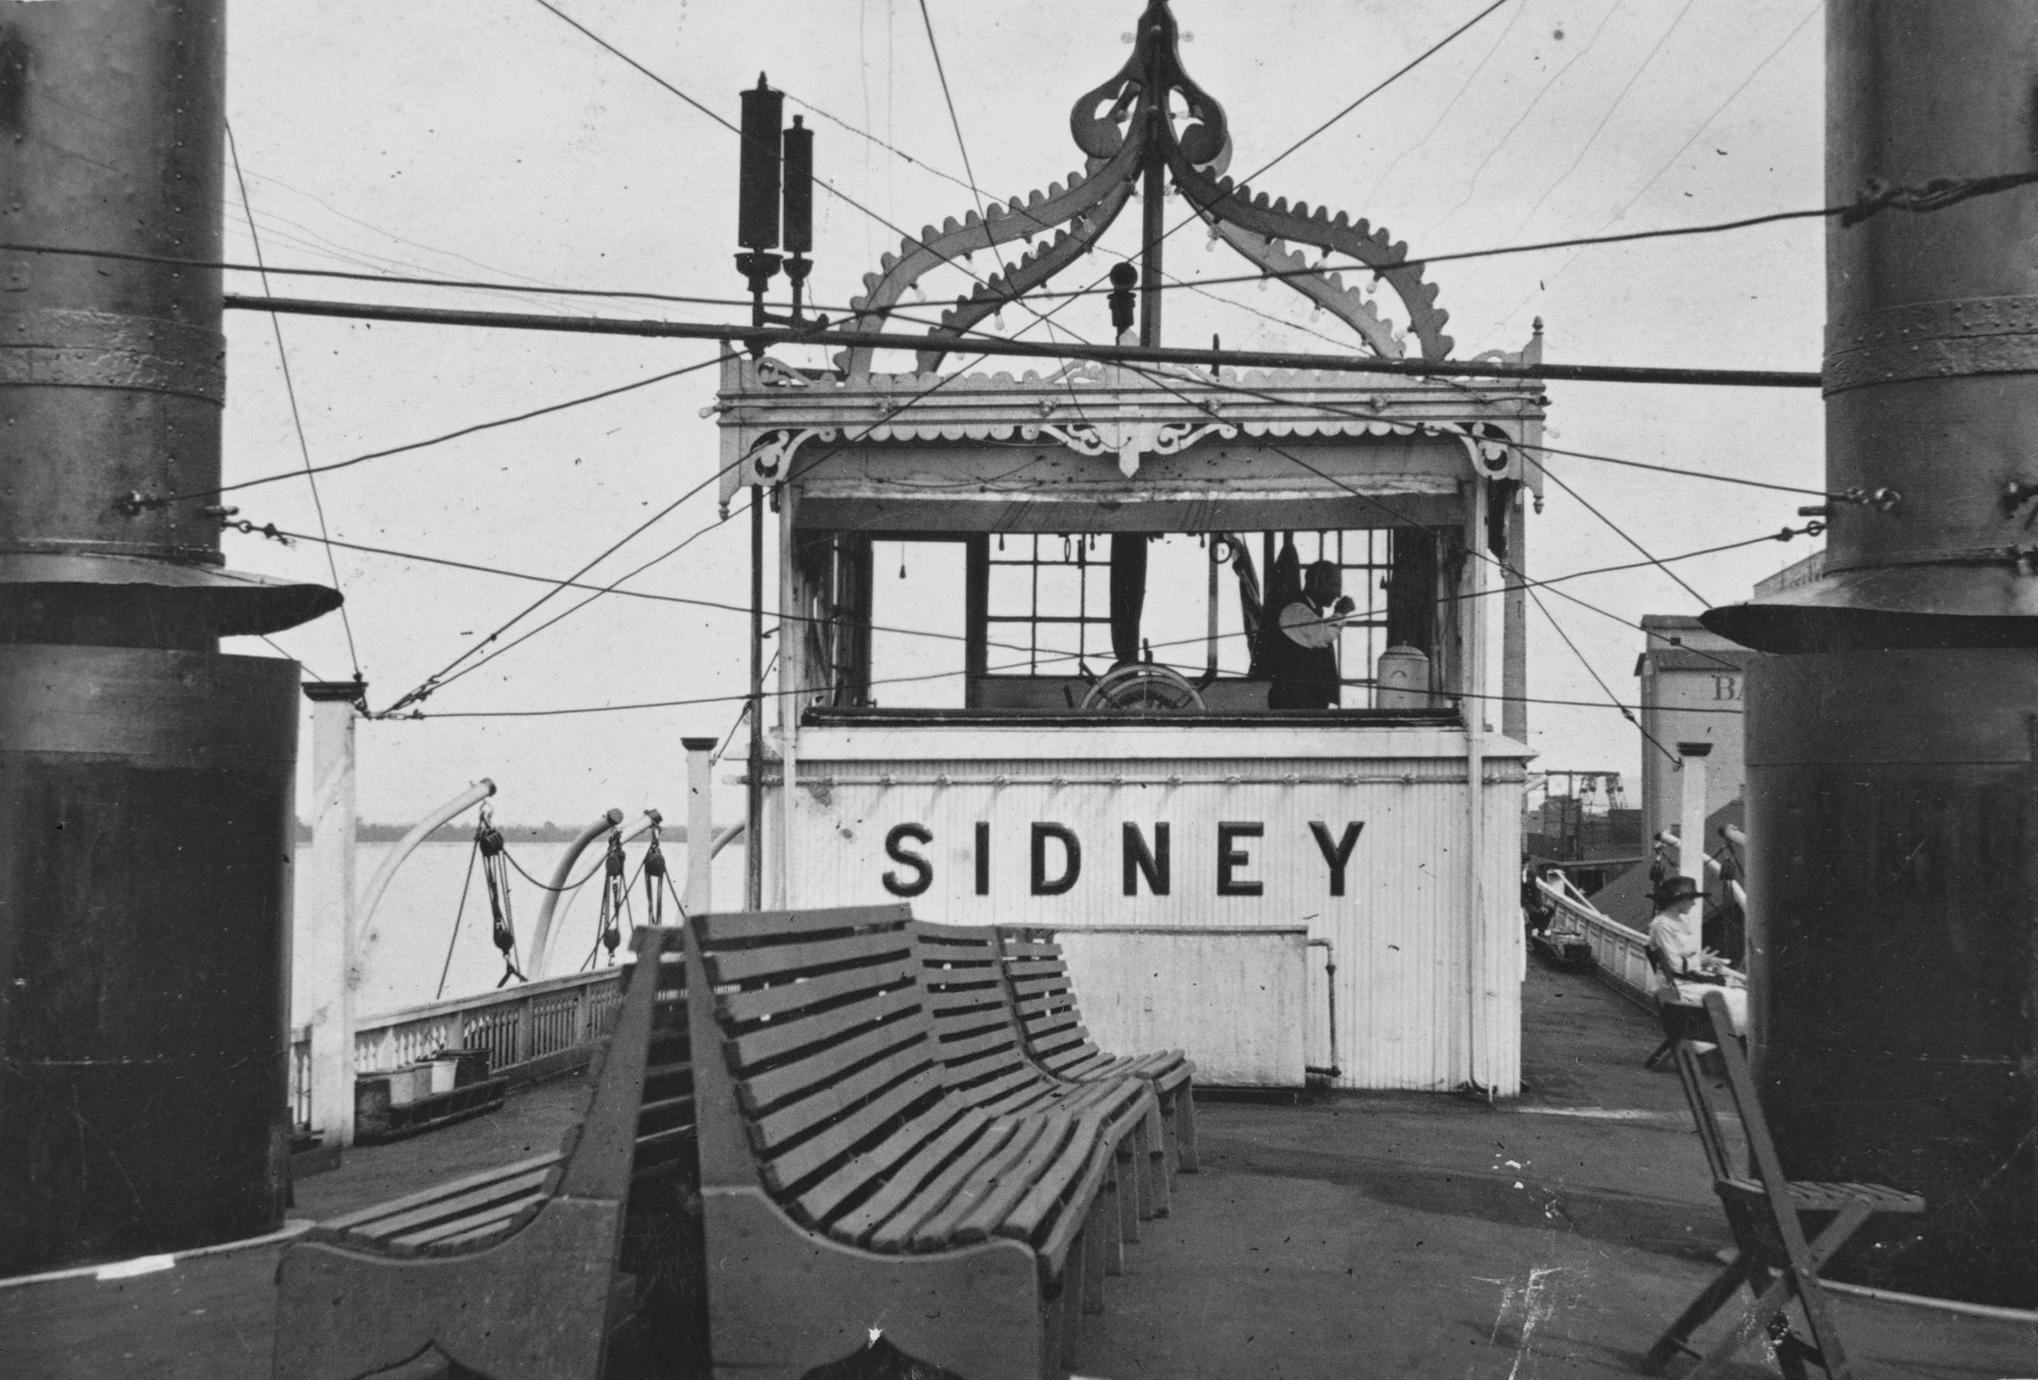 Sidney (Packet/Excursion, 1880-1921)